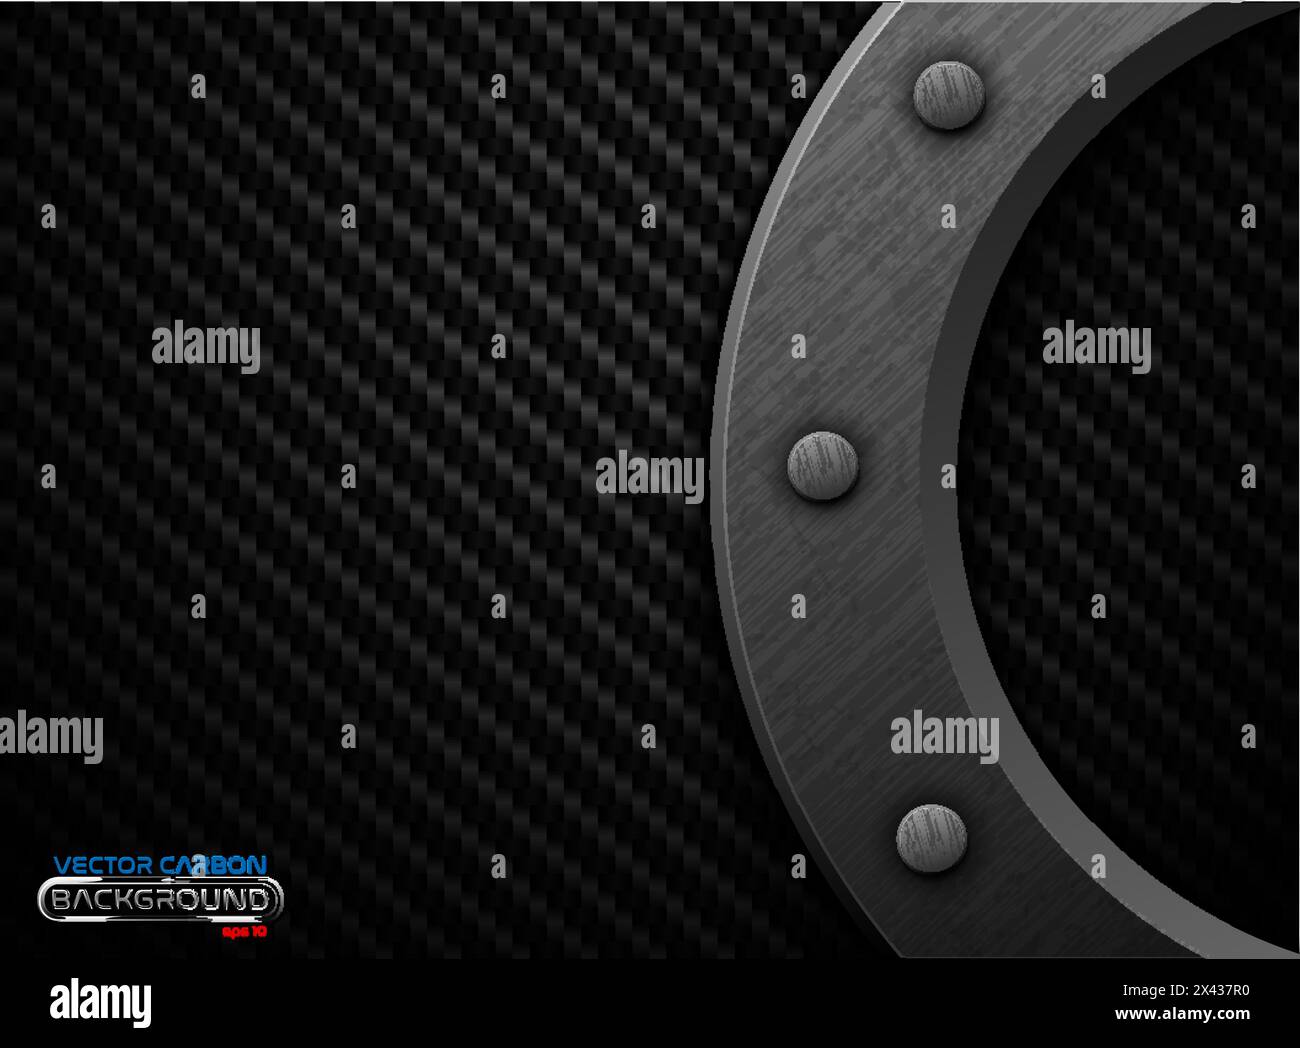 Vector black carbon fiber background with dark grunge metal ring and rivet. Scratched riveted surface heavy industrial design illustration Stock Vector